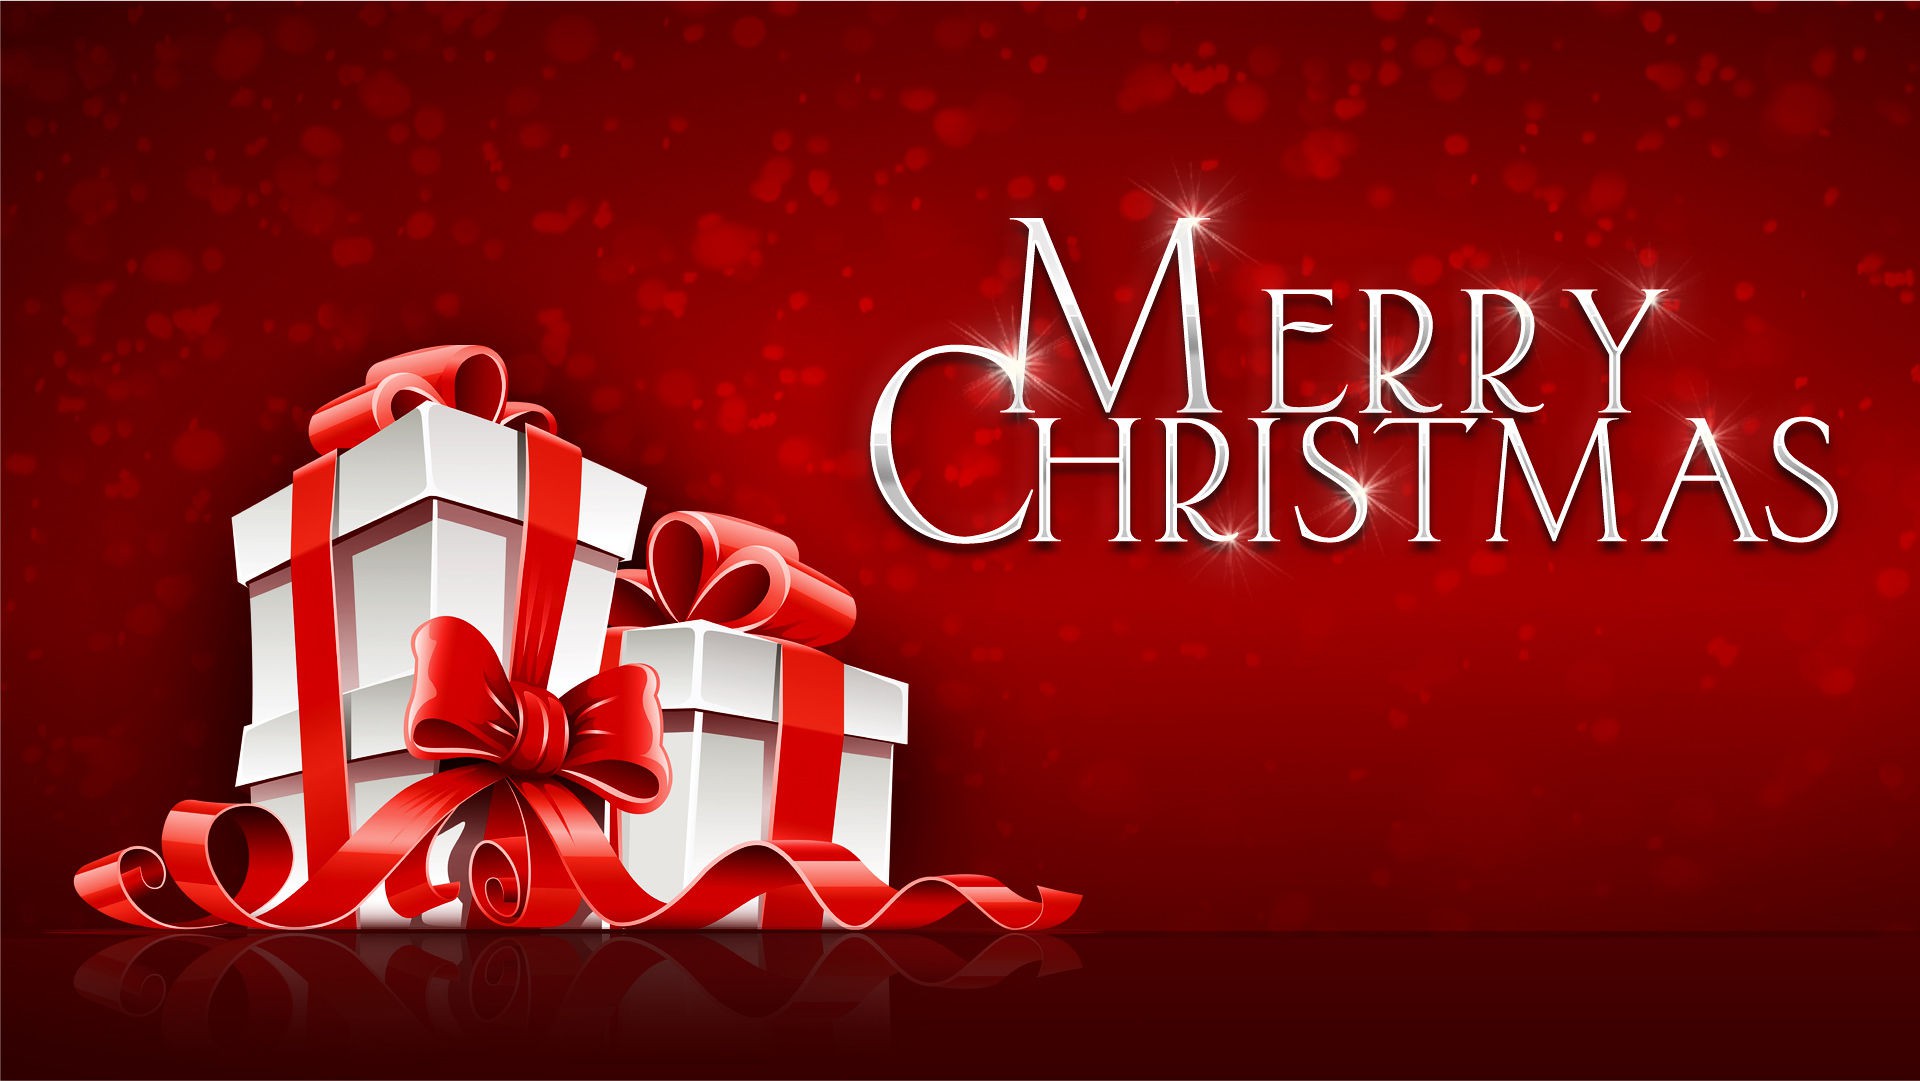 Merry Christmas Text Download Hd Picture